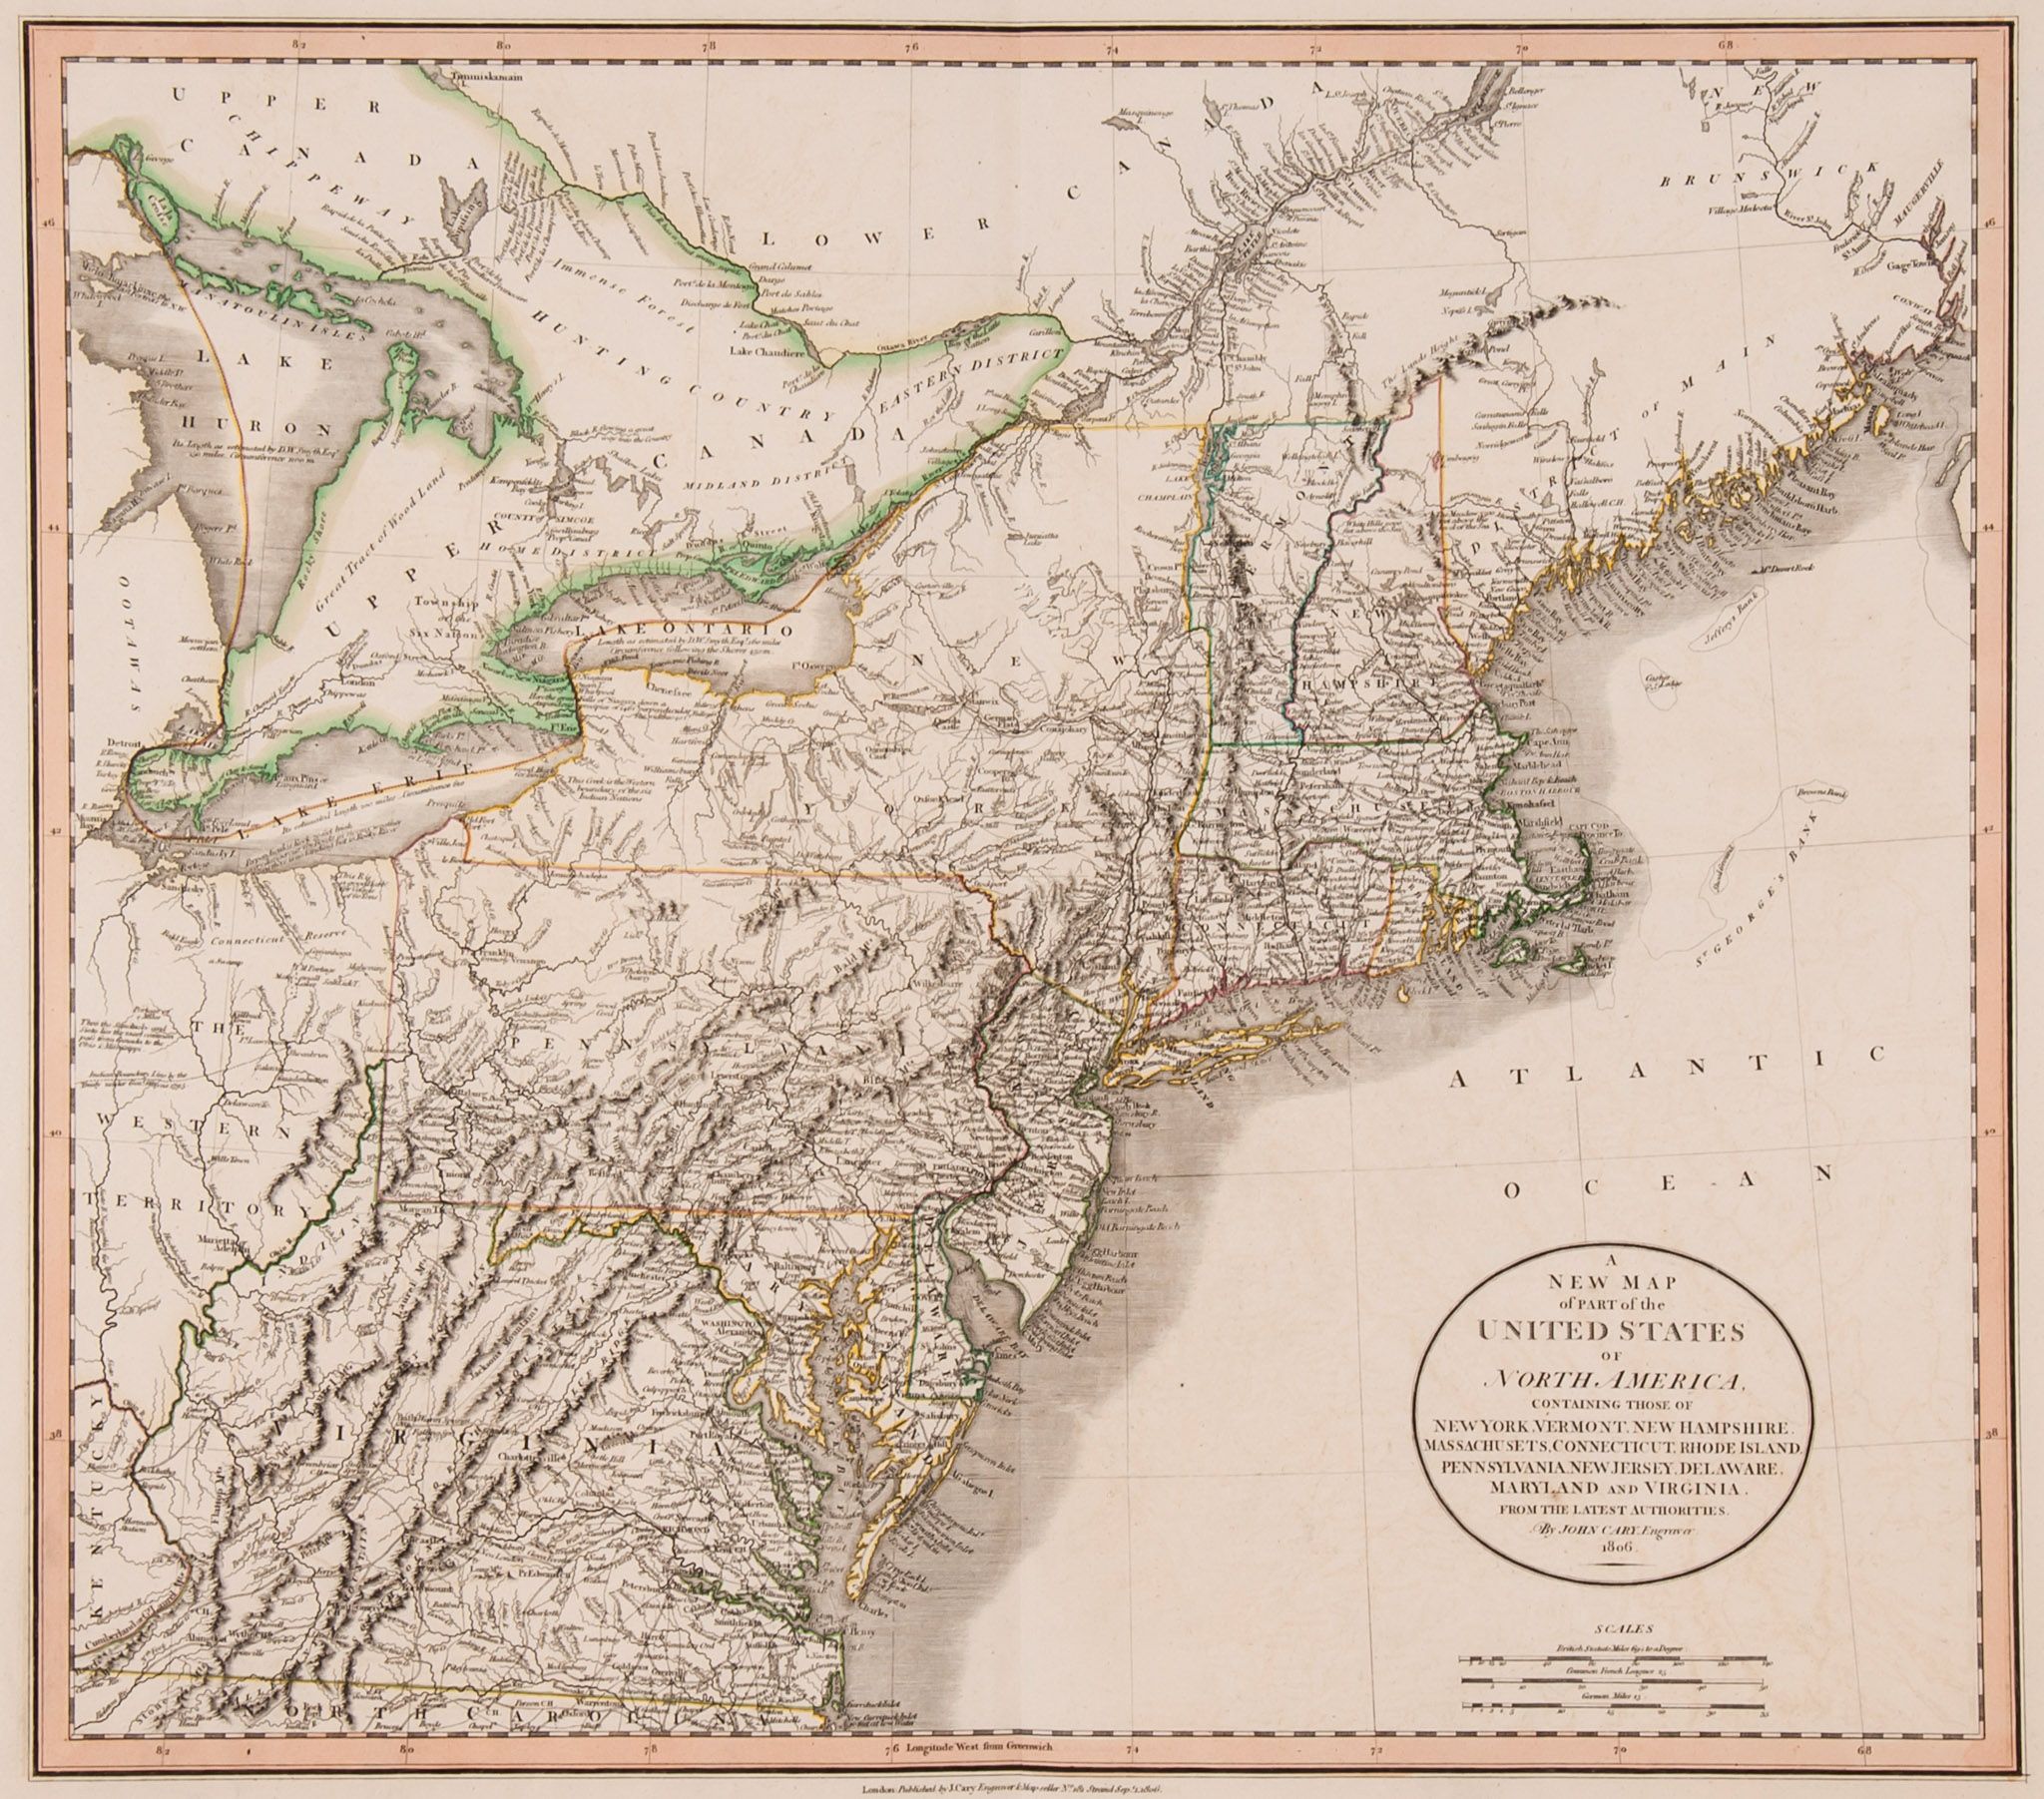 Cary (John) - A New Map of Part of the United States of North America, from New Brunswick to North